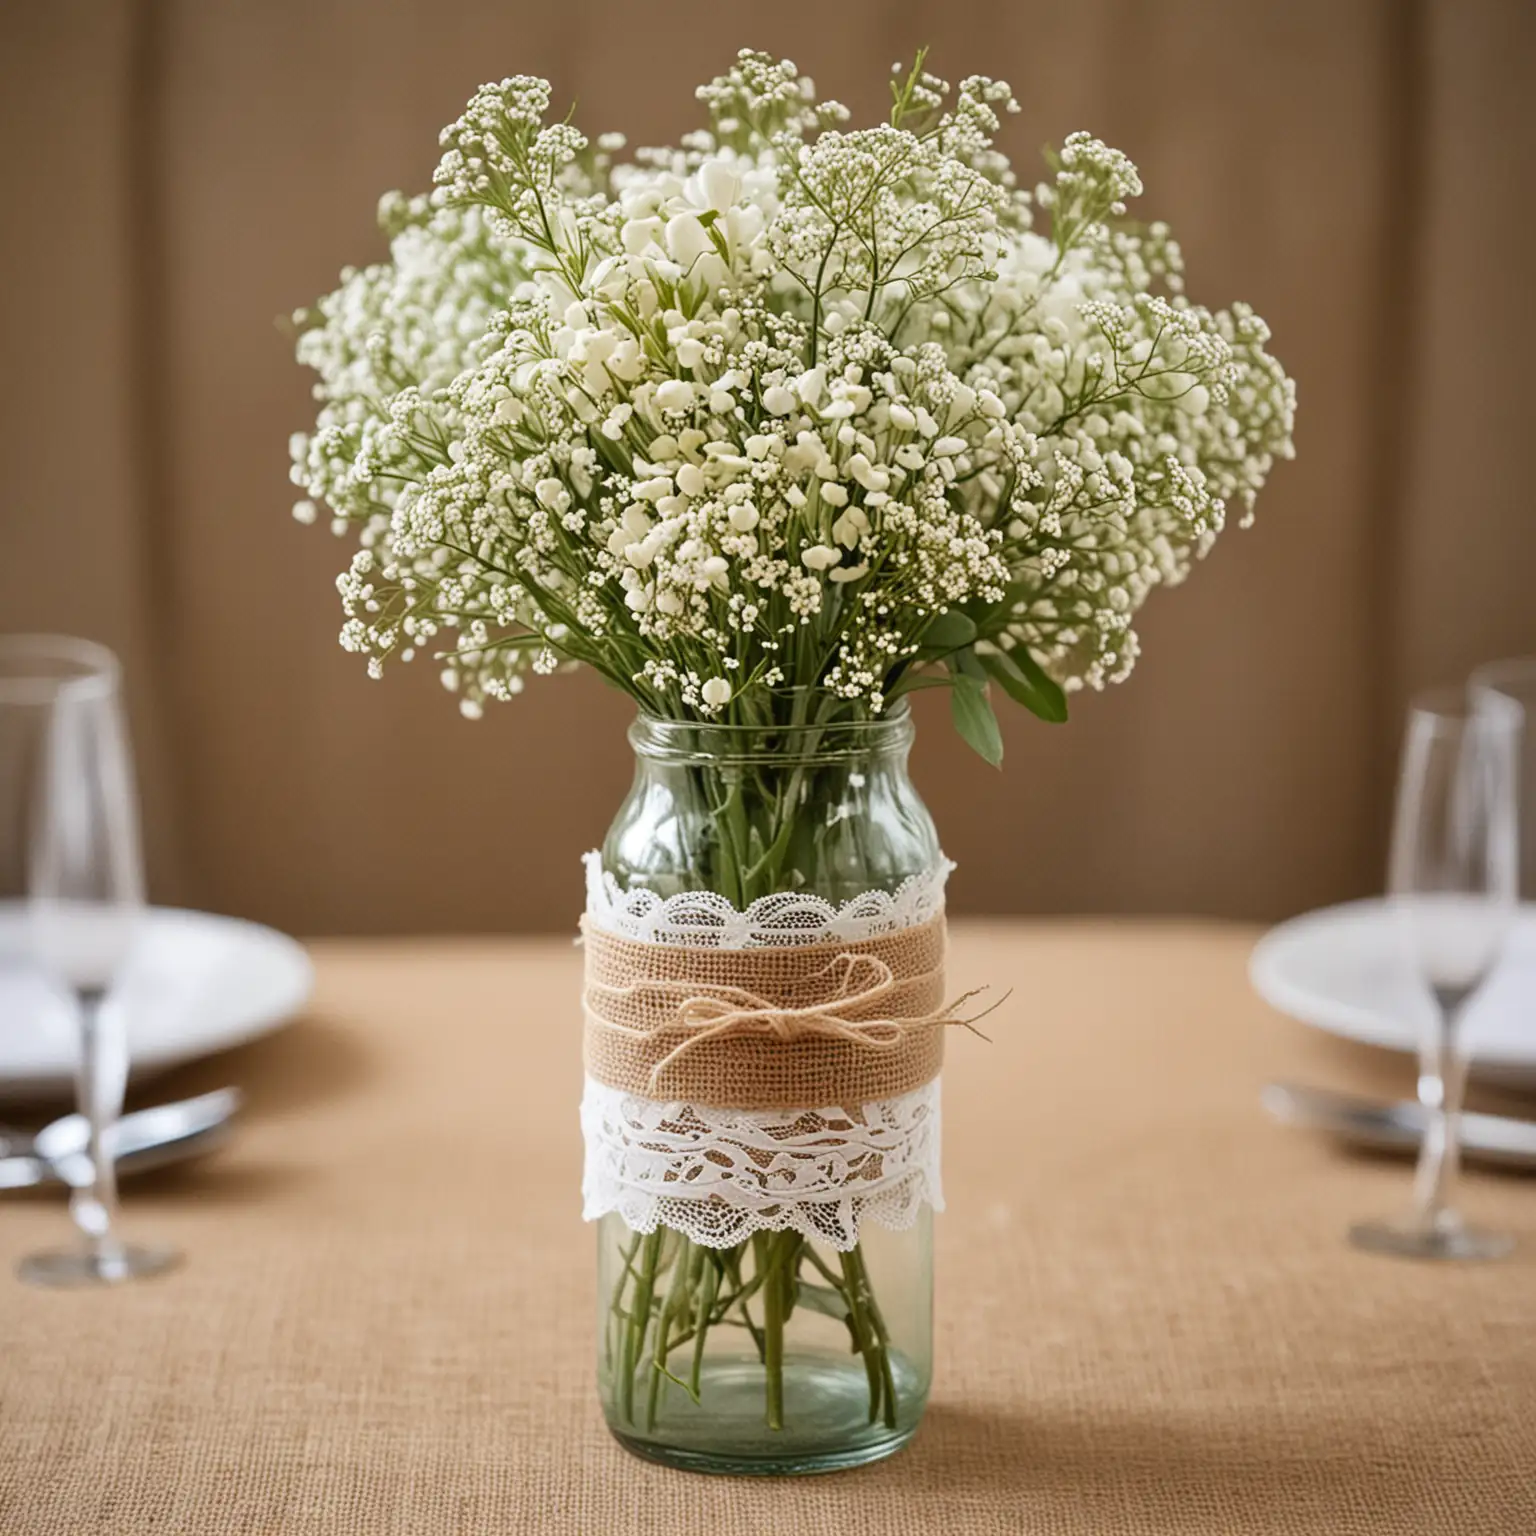 cylinder glass vase wedding centerpiece that is nature inspired with burlap and lace and baby's breath